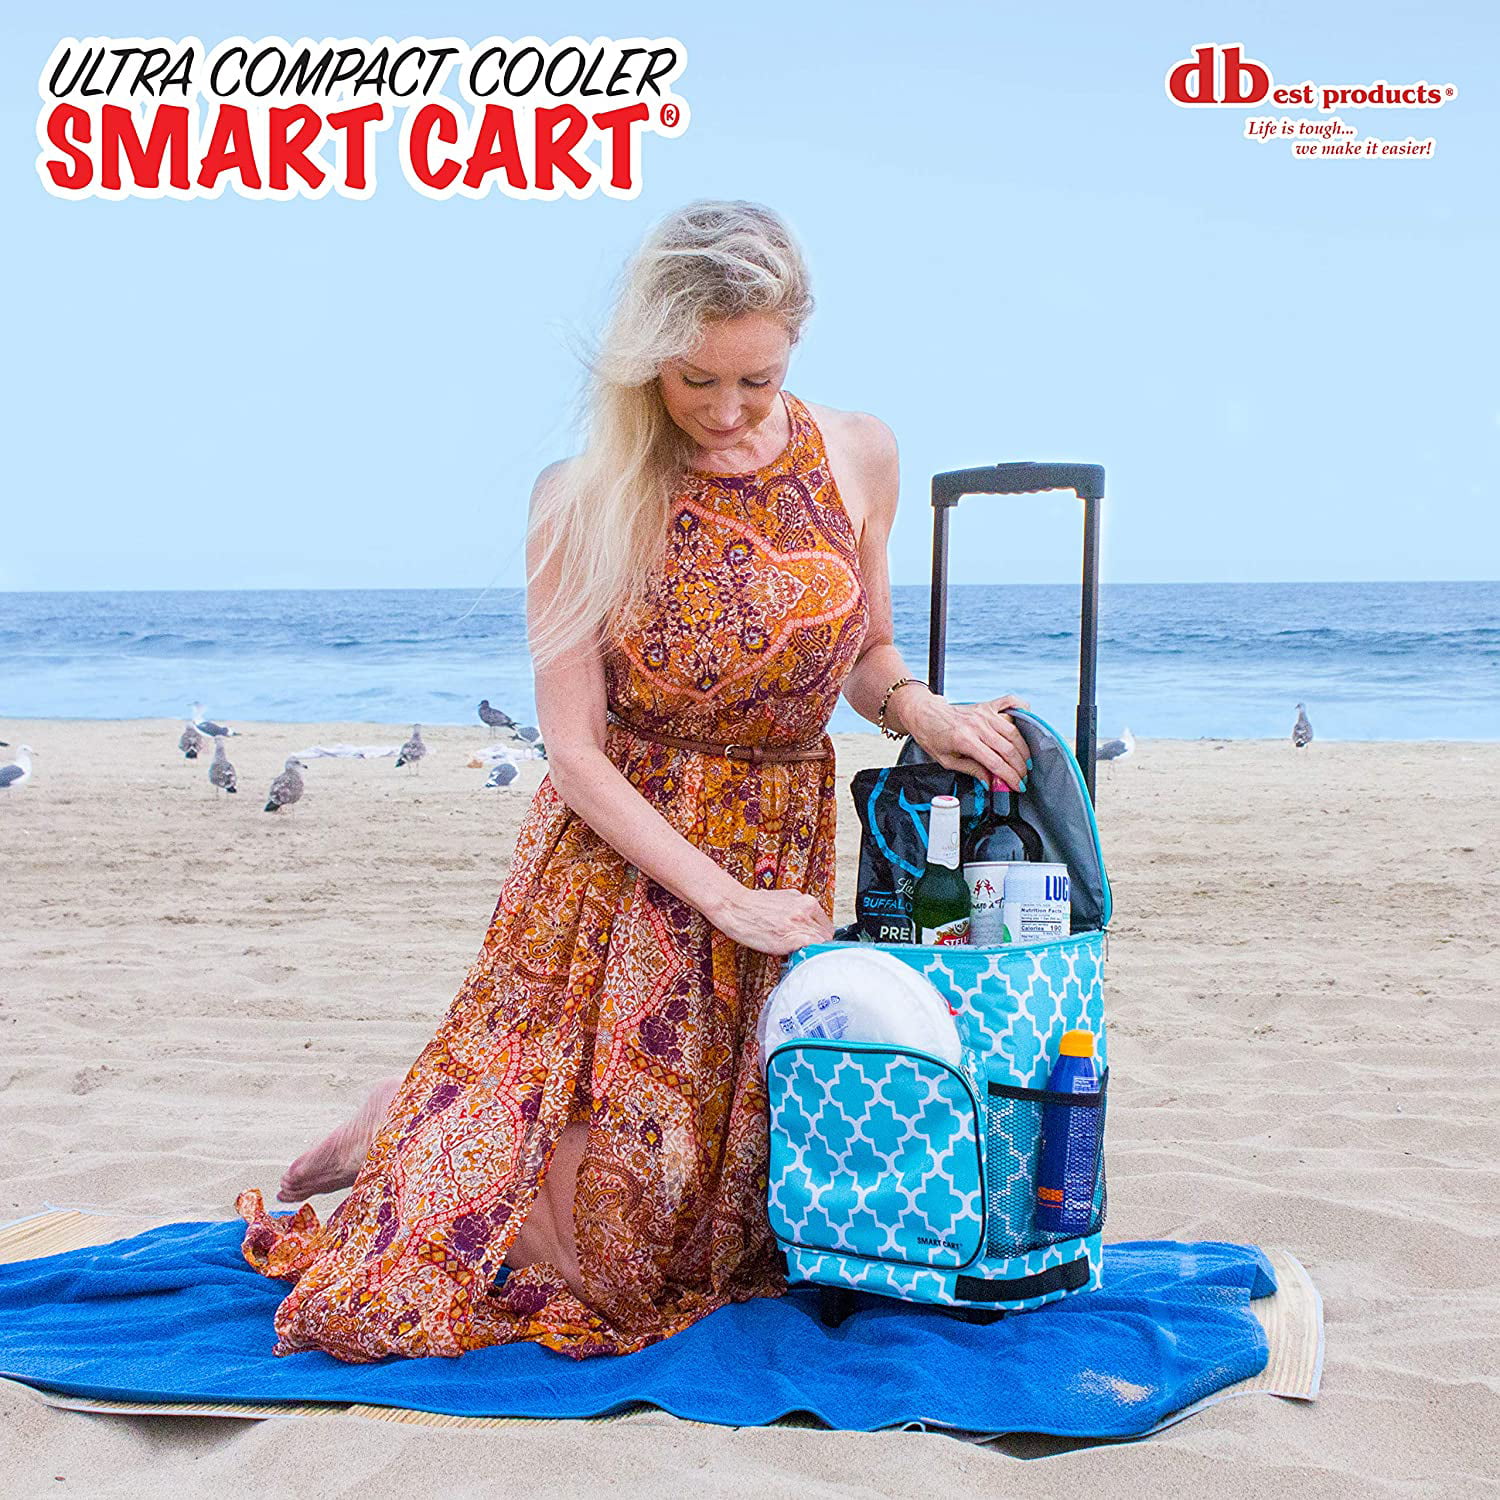 dbest products Ultra Compact Cooler Smart Cart, Moroccan Tile Insulated  Collapsible Rolling Tailgate BBQ Beach Summer